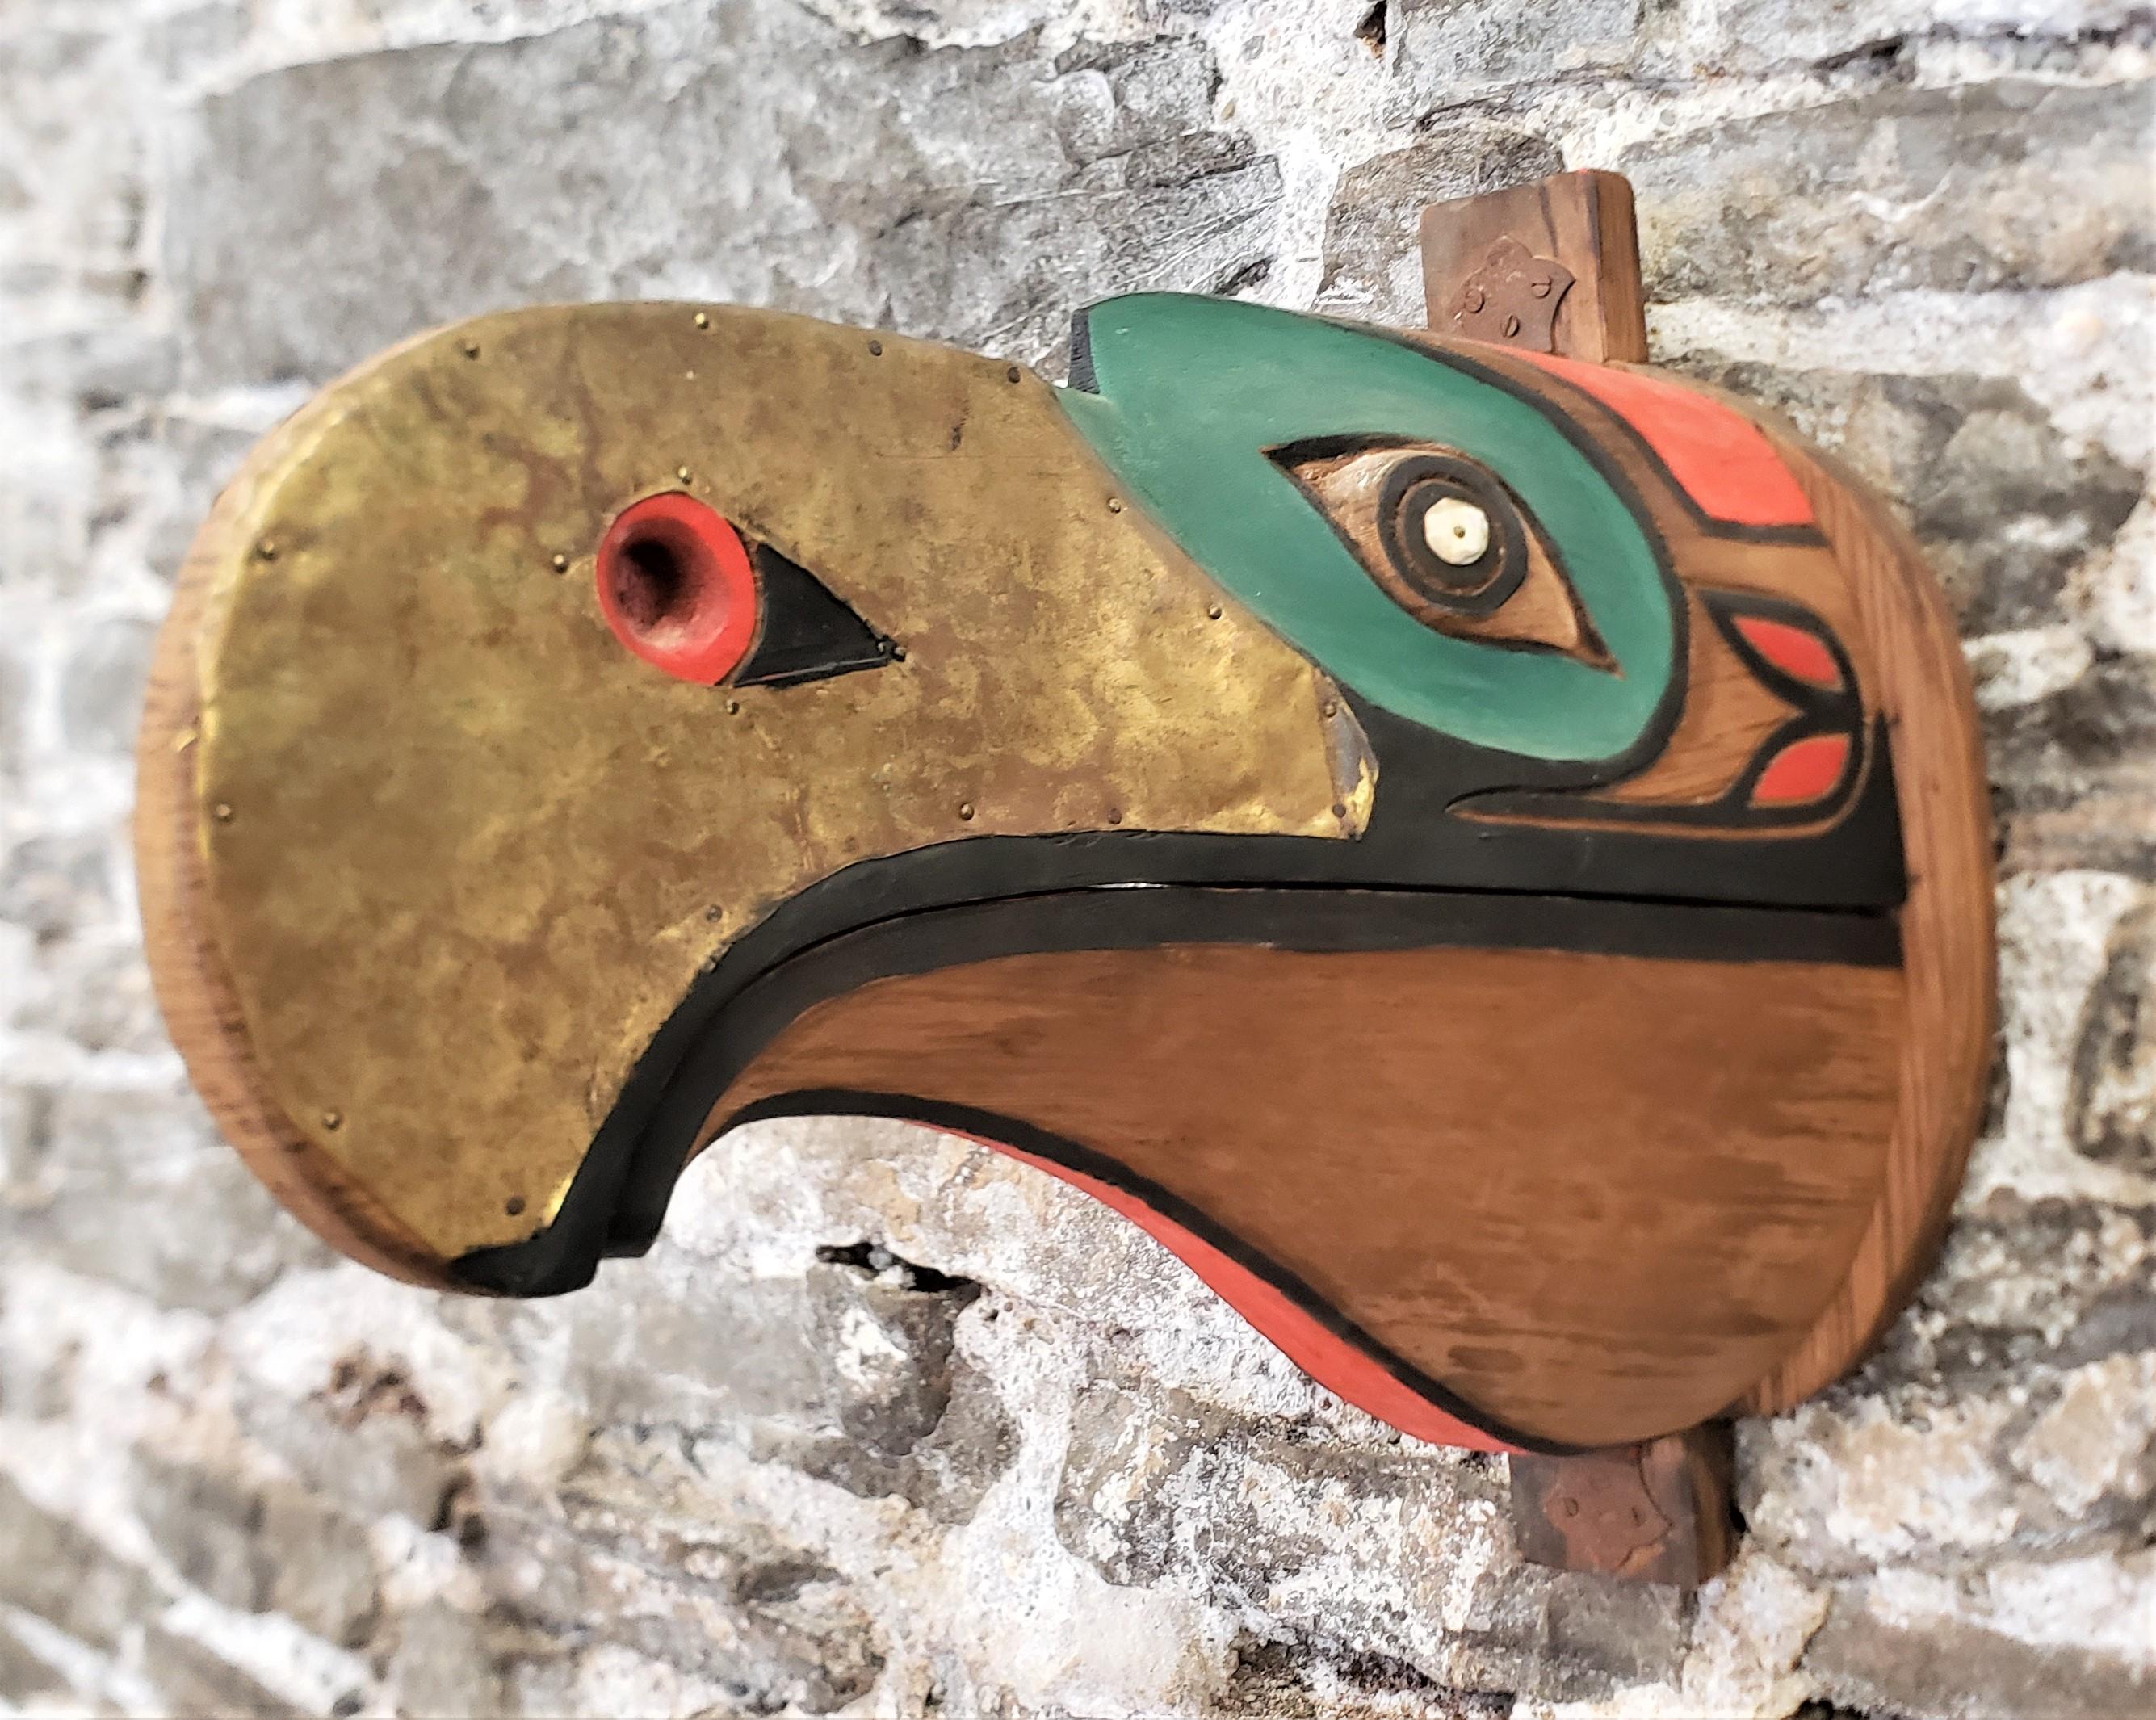 This large and highly decorative articulated hand-carved mask is unsigned, but presumed to have originated from Canada and done in the West Coast Haida style. The mask or wall sculpture is done in a softwood which has been hand-carved and